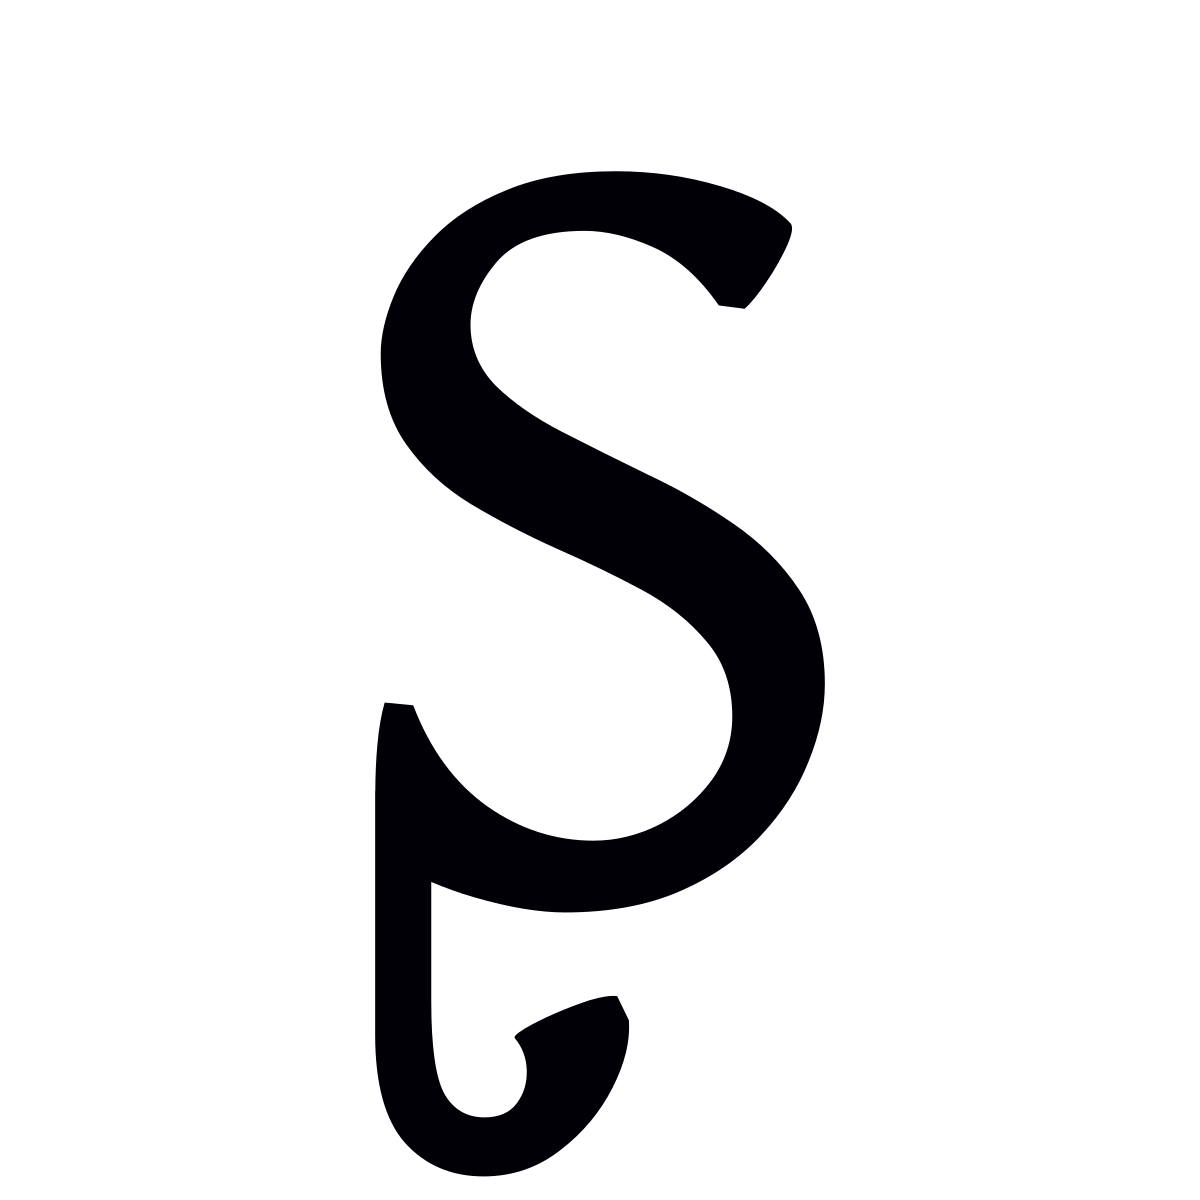 Download File:Latin capital letter S with hook.svg - Wikimedia Commons